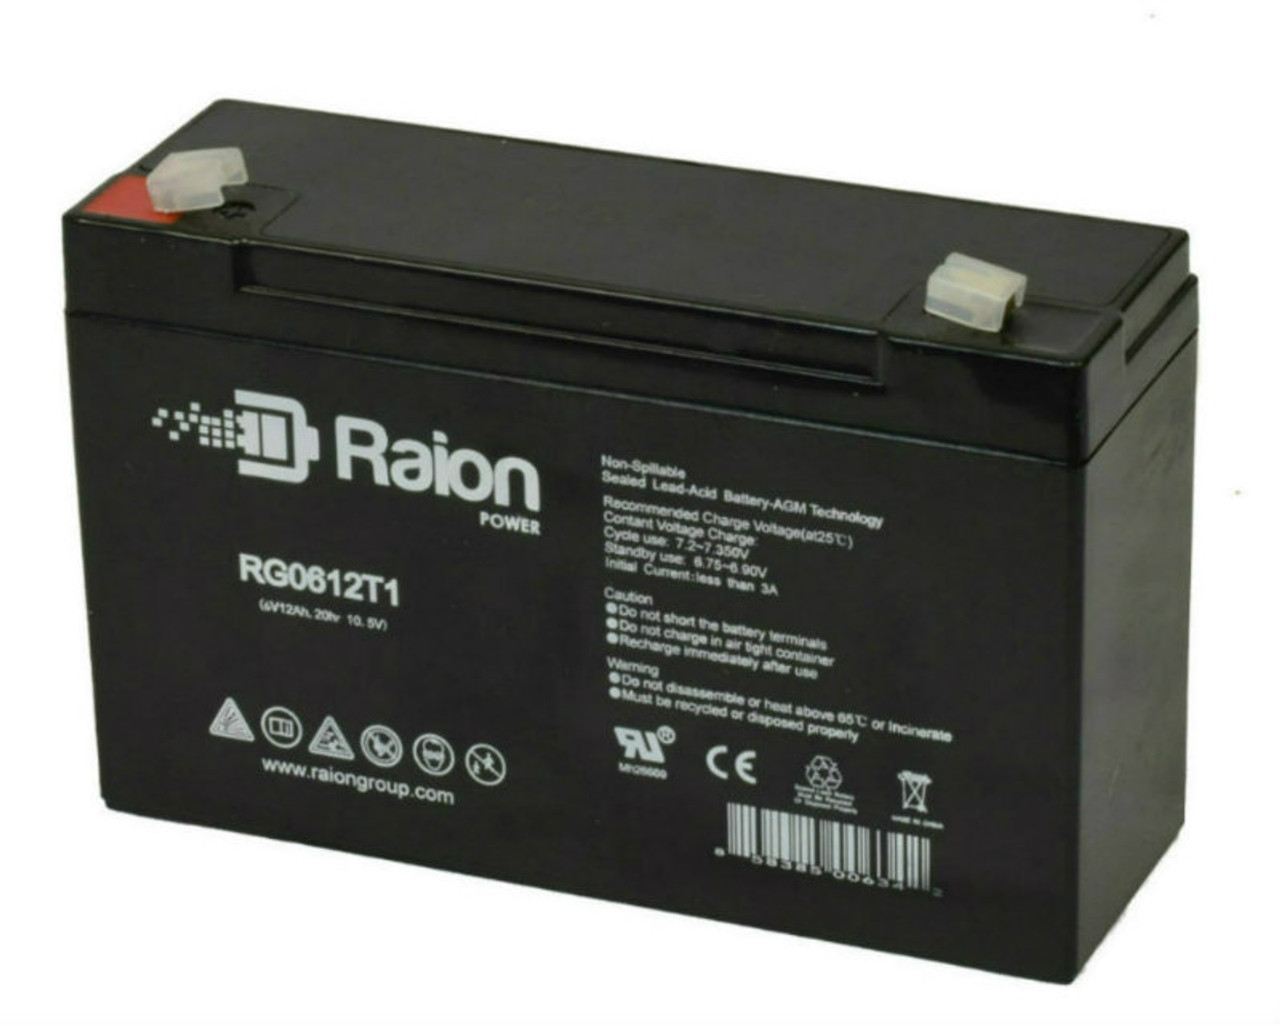 Raion Power RG06120T1 6V 12Ah Replacement UPS Battery Cartridge for IBM OP700AVR